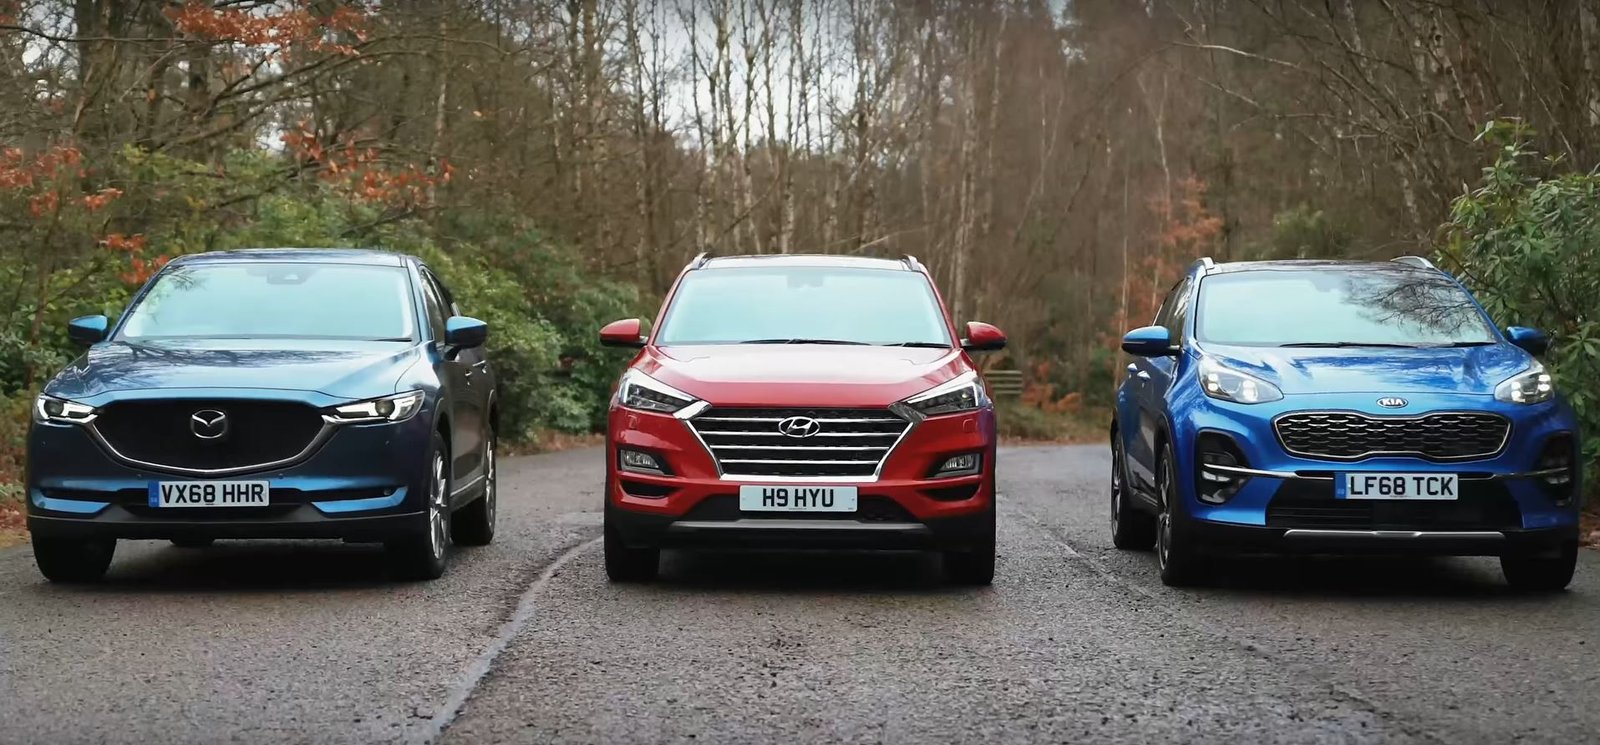 Hyundai Tucson Vs Mazda Cx 5 Which Is Better Uncovering The Ultimate